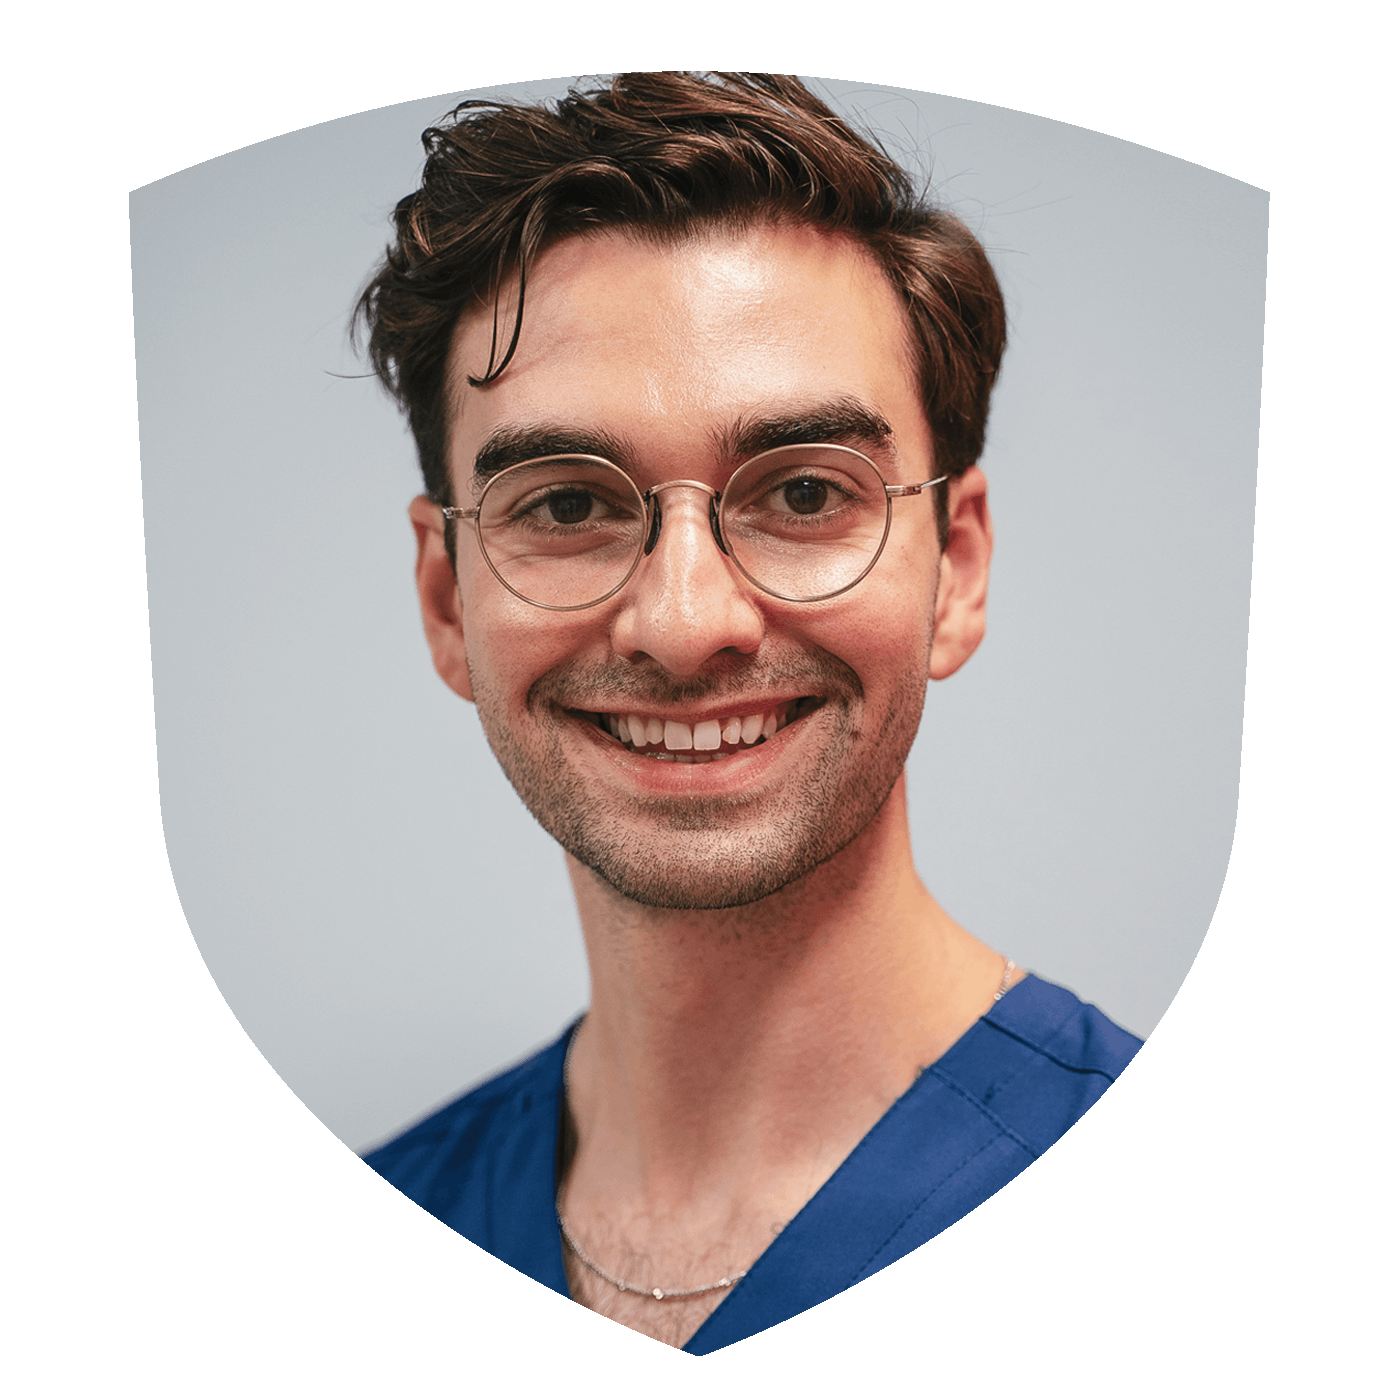 Dr Max Greenfield - Harley Academy Clinical Trainer